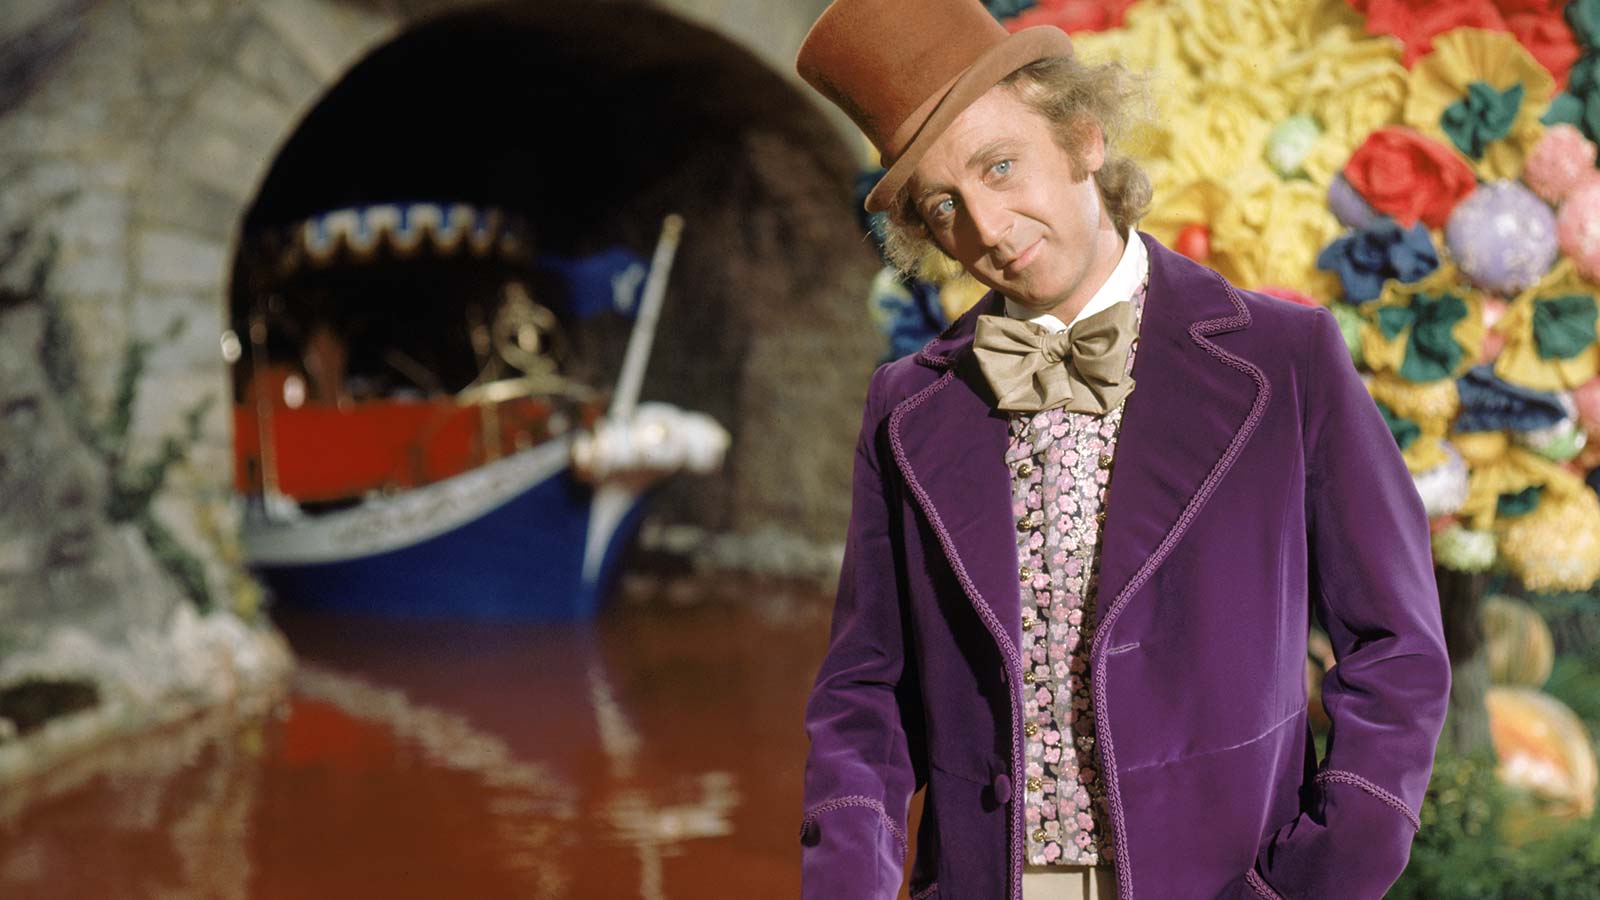 Willy Wonka & the Chocolate Factory / Charlie and the Chocolate